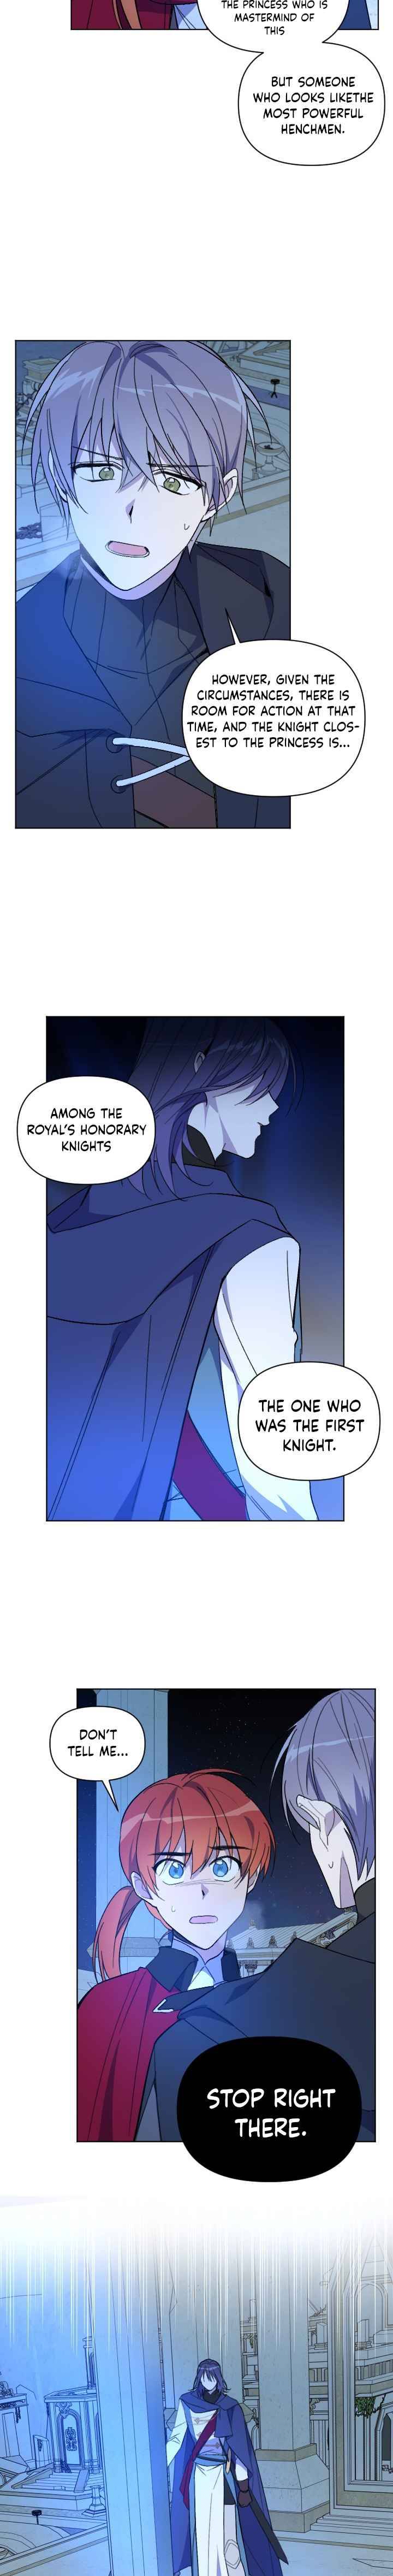 Asirhart Kingdom’s Aide Chapter 45 - Page 13